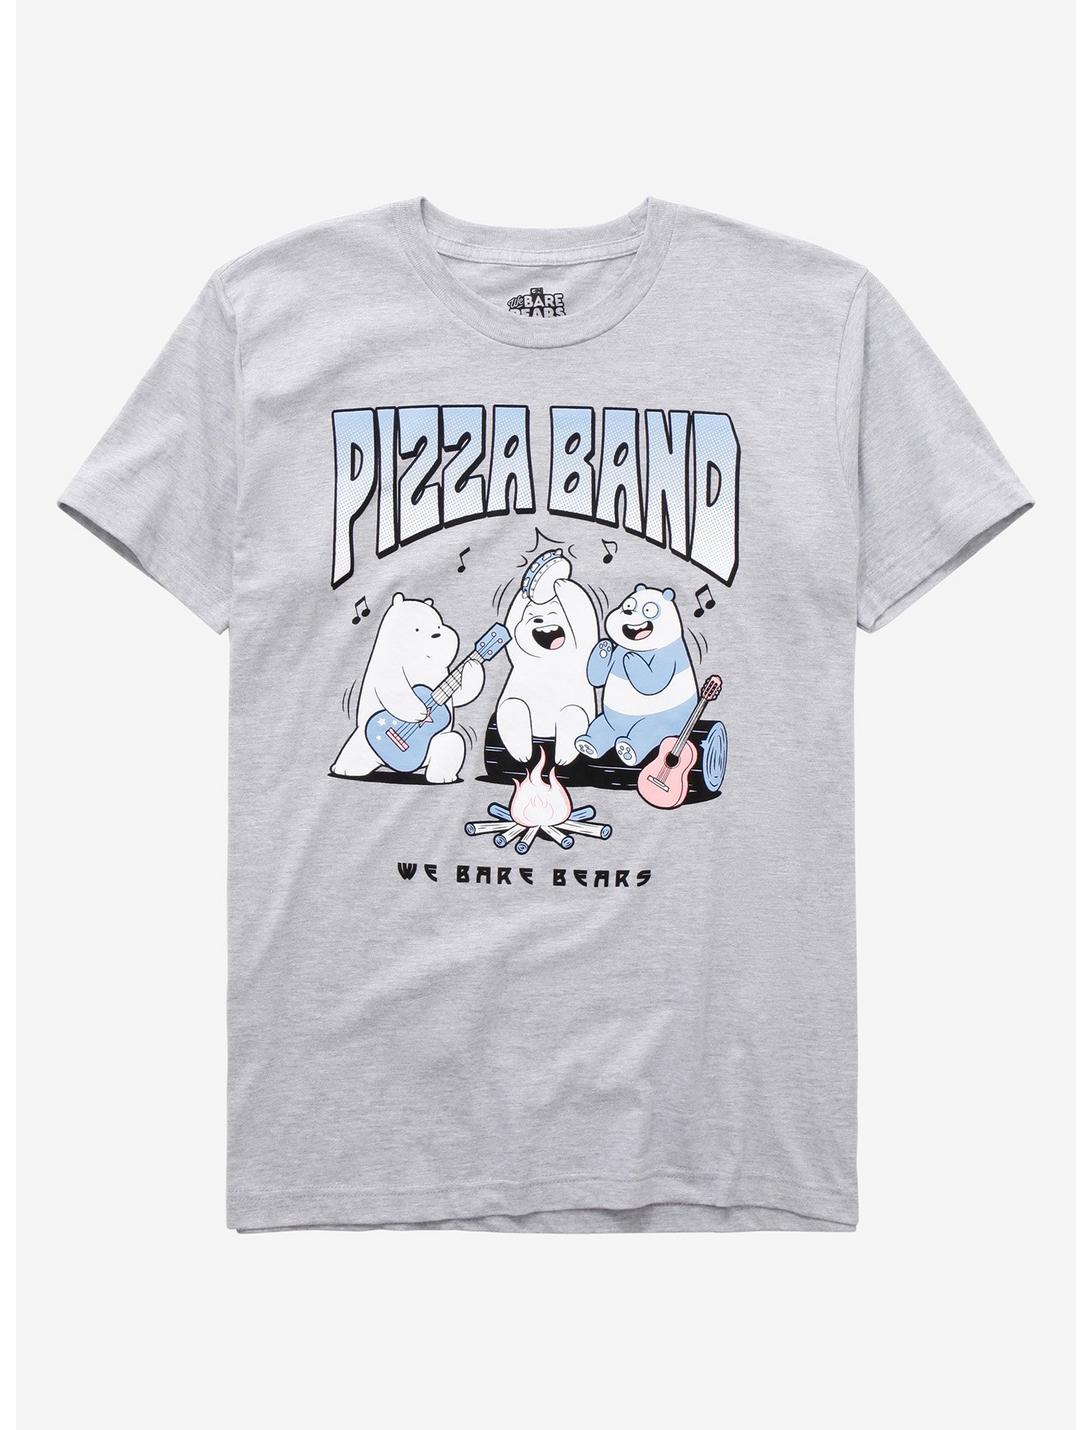 We Bare Bears Pizza Band T-Shirt - BoxLunch Exclusive, HEATHER GREY, hi-res